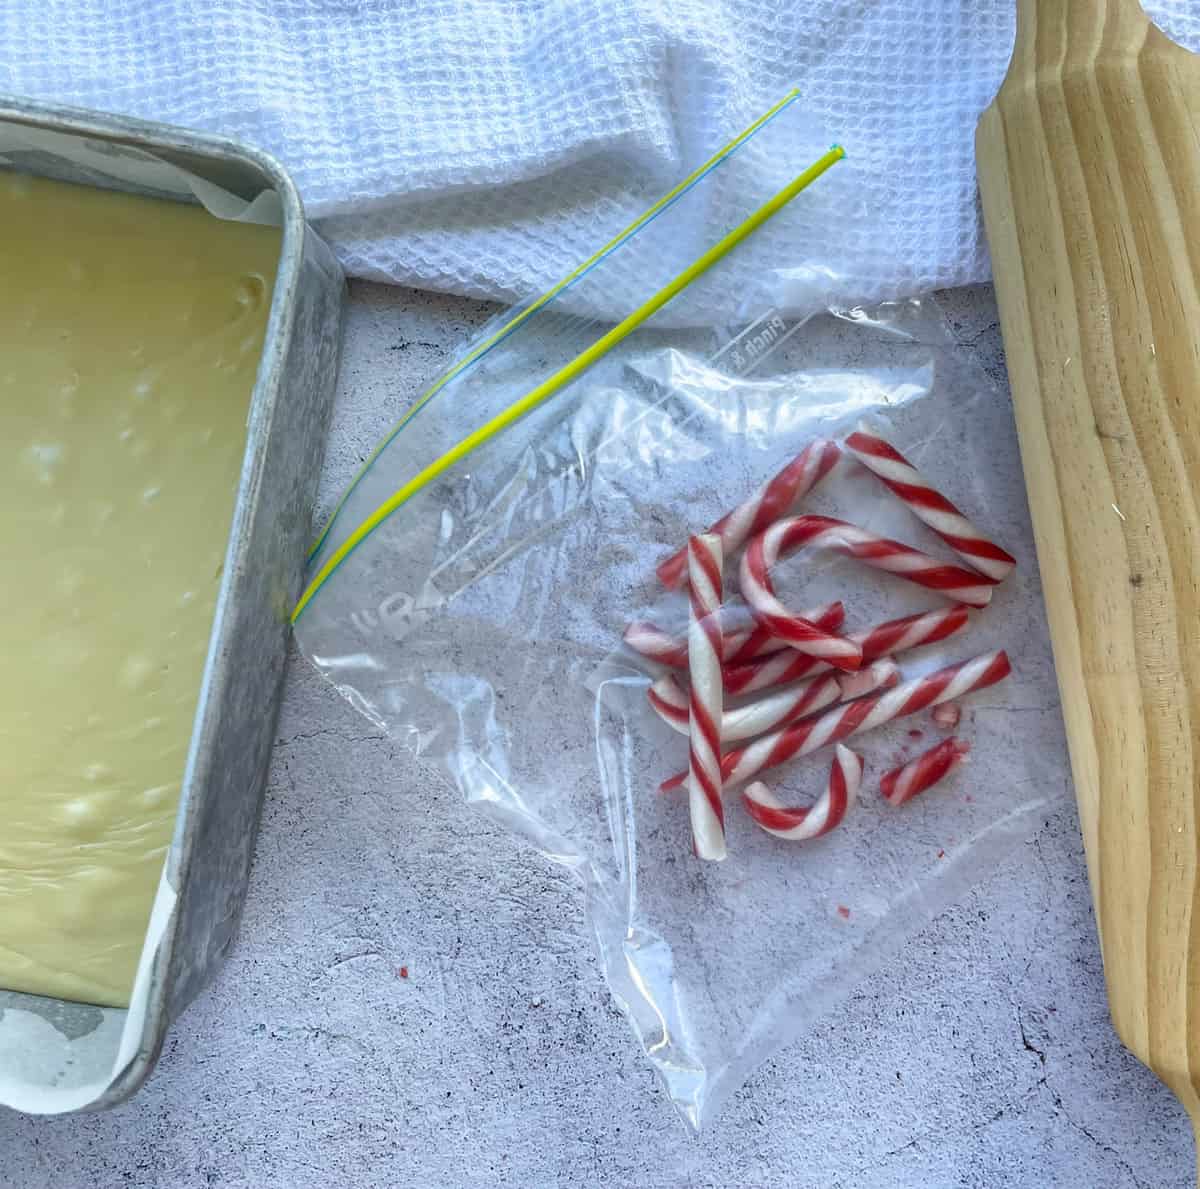 Crush candy canes in a ziplock bag with a rolling pin for the topping